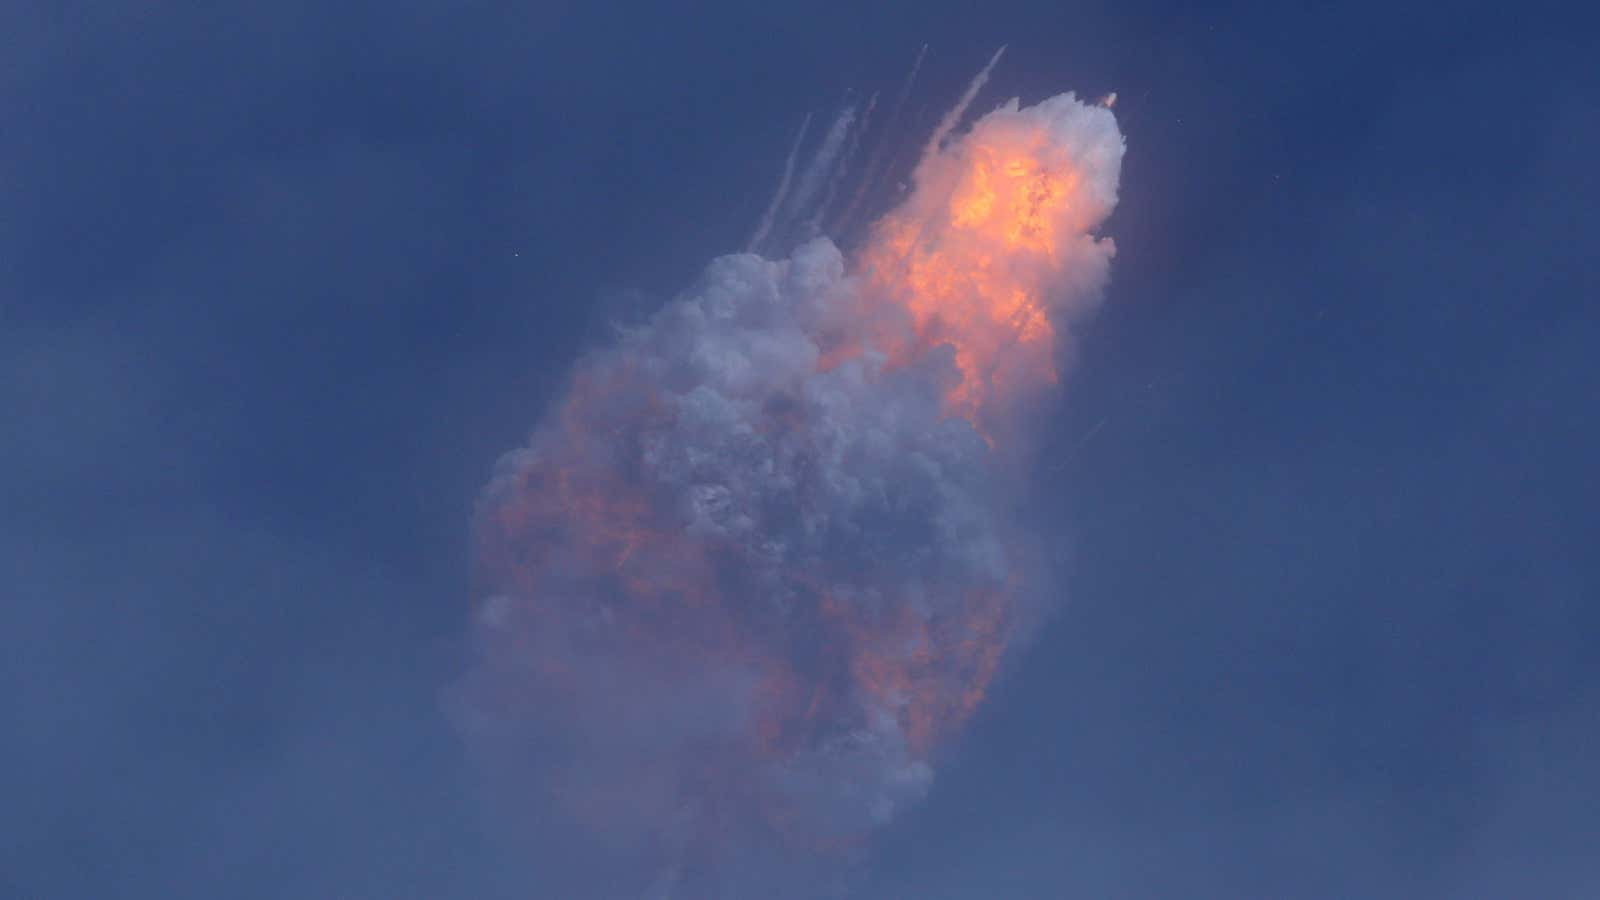 A SpaceX Falcon 9 goes up in smoke, in a good way.